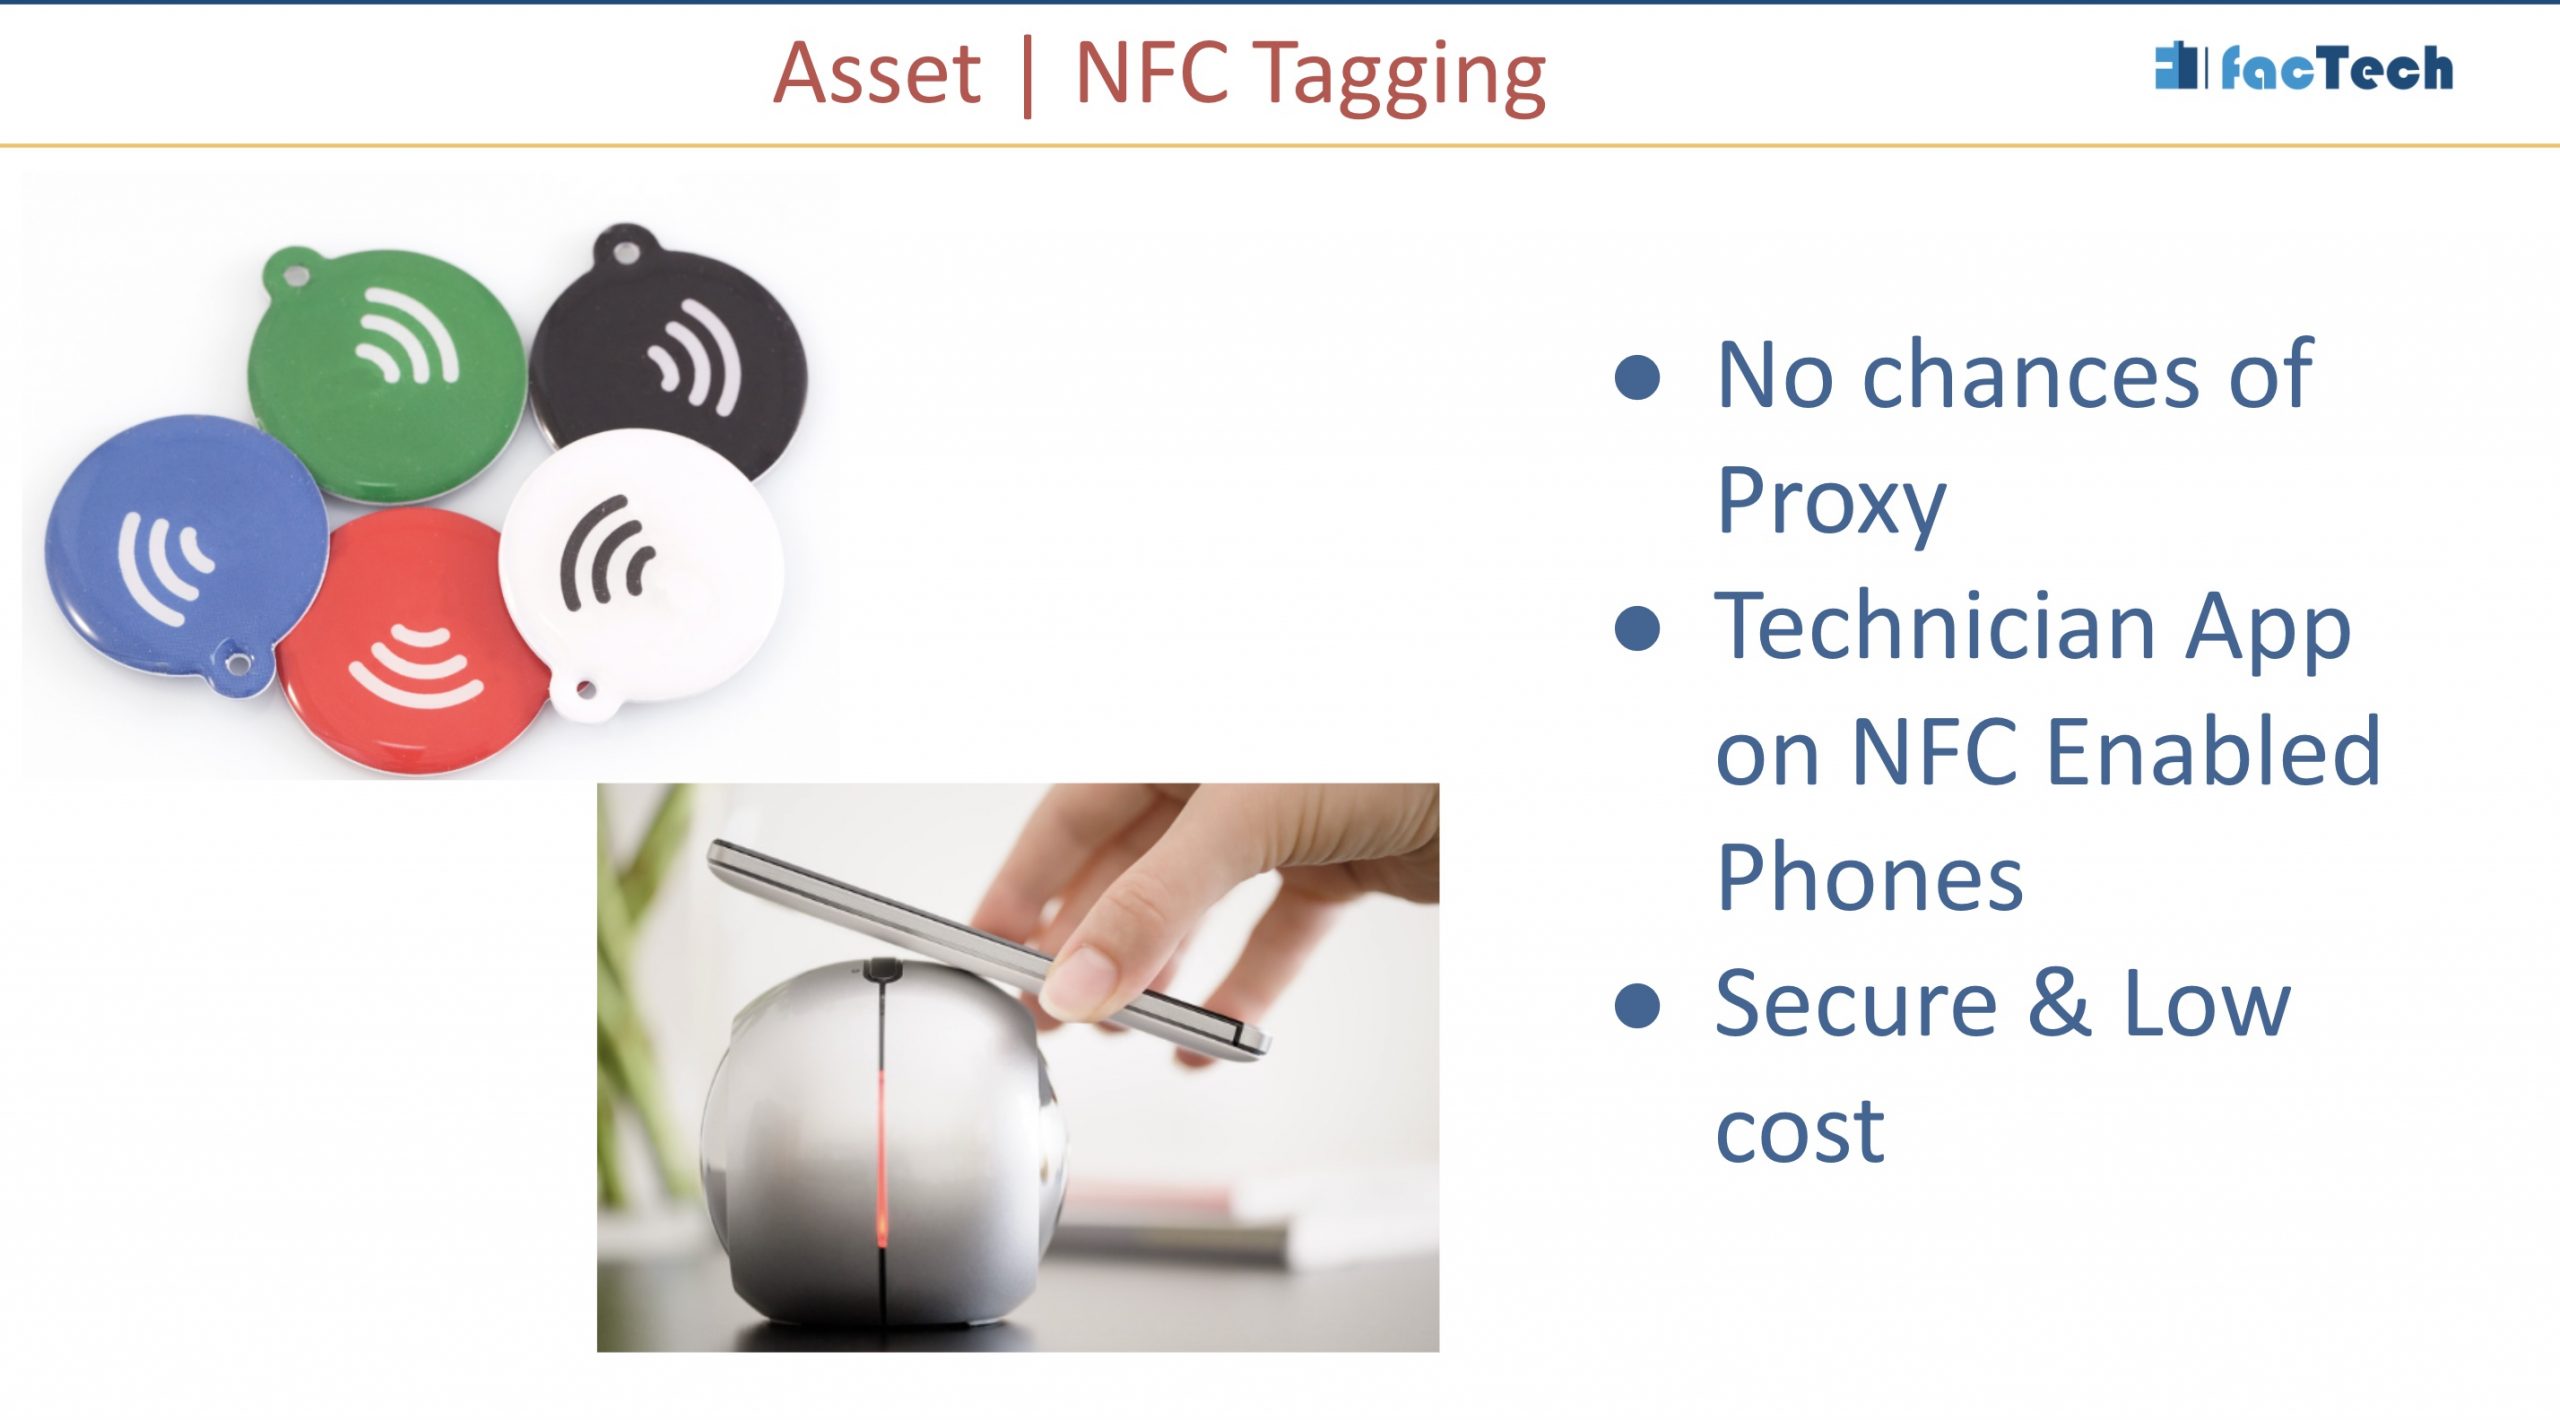 Tag assets with NFC cut false digital checklist filling and are secure